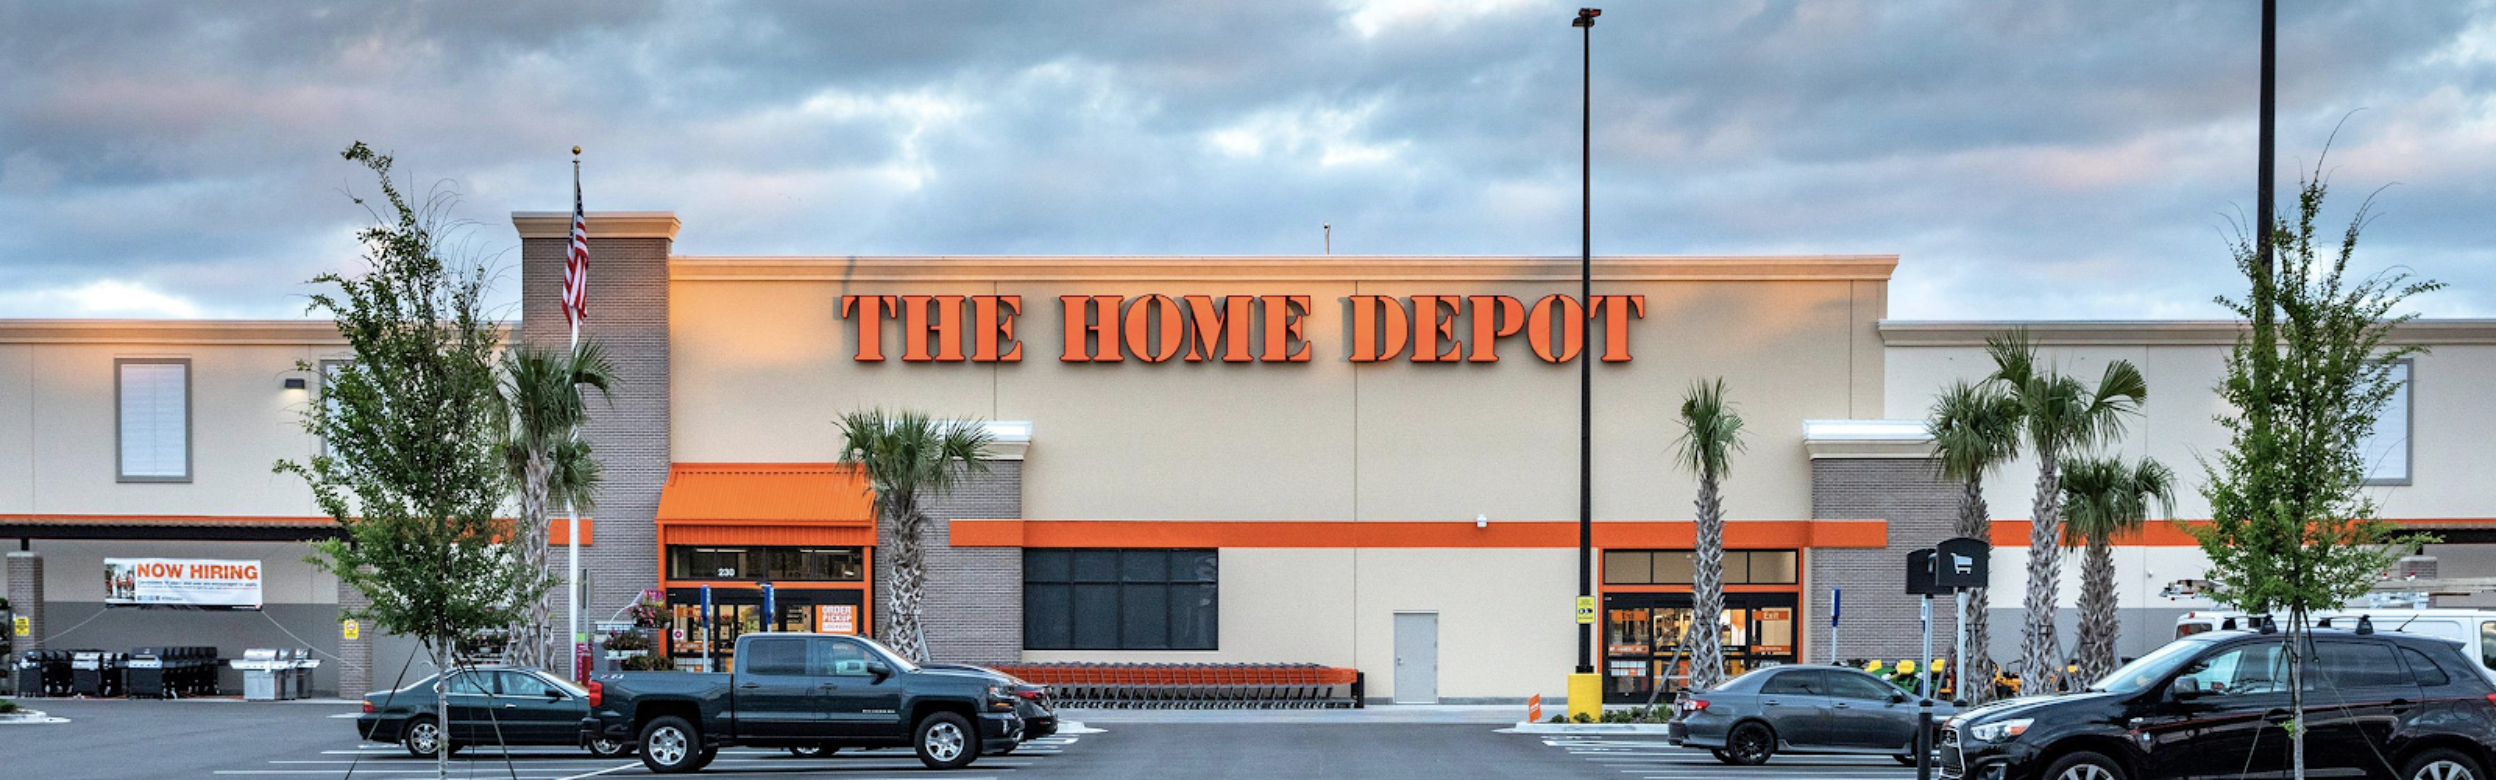 Making sense of The Home Depot data options for suppliers 